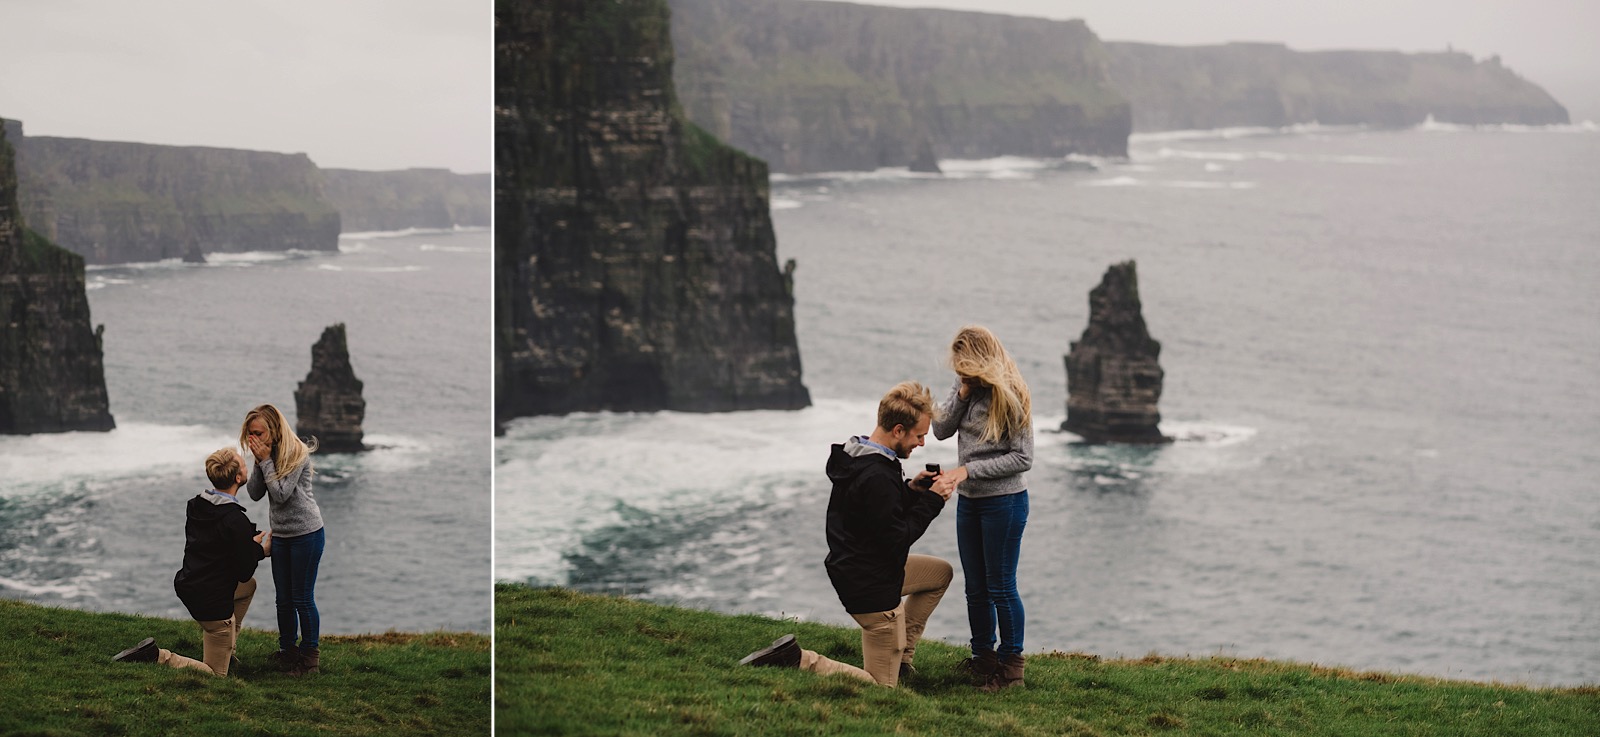 Live_Engagement_Cliffs_of_Moher0003